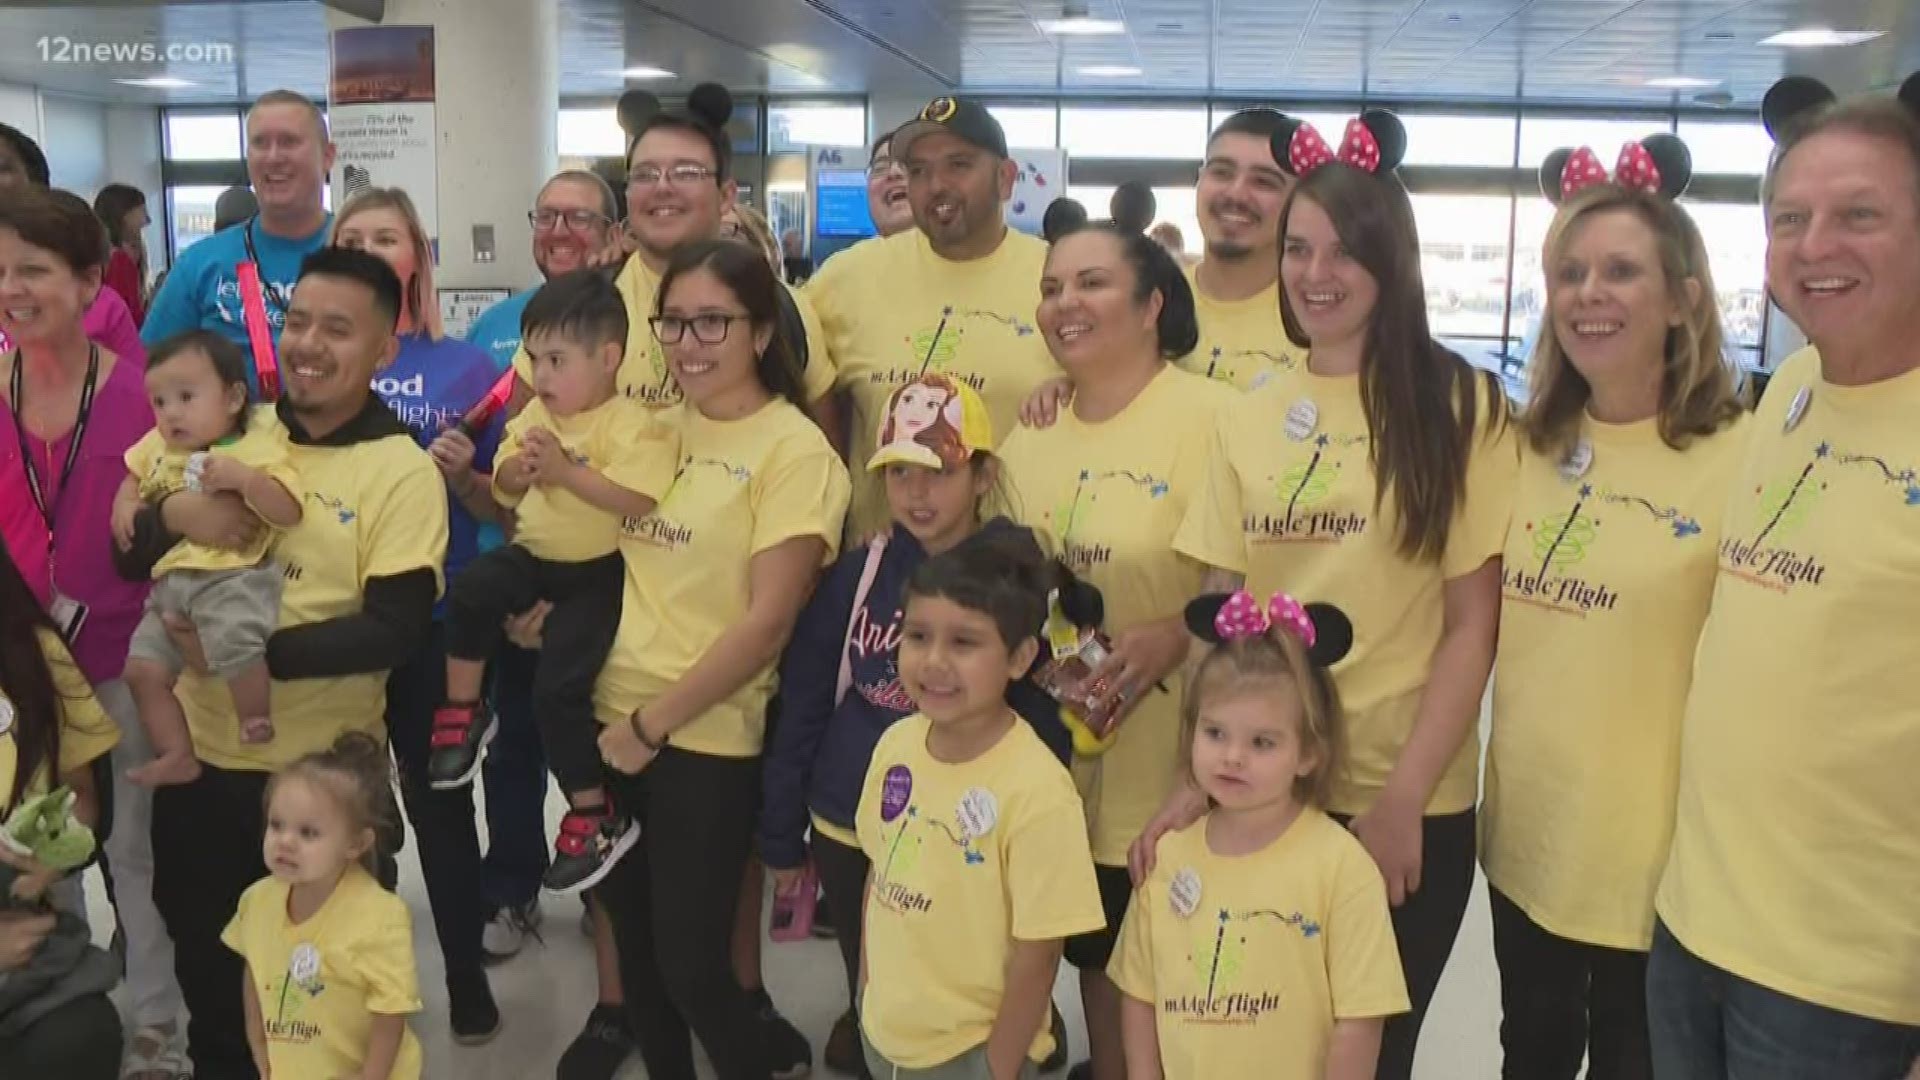 These mAAgic flights help children with critical illnesses have big experiences. This group from Arizona will go to Disney World and Wizarding World of Harry Potter.